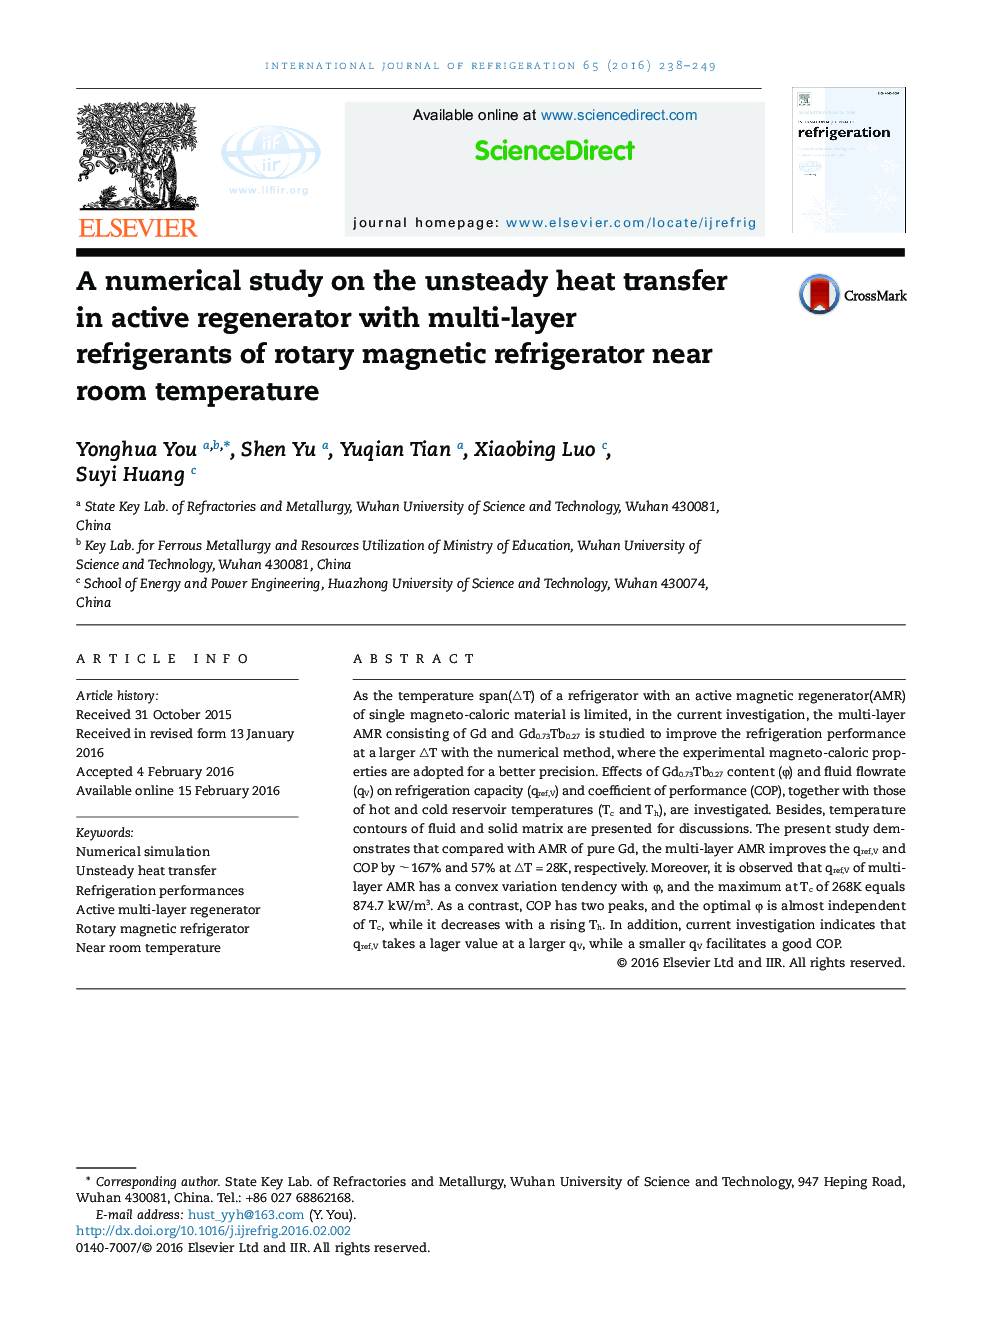 A numerical study on the unsteady heat transfer in active regenerator with multi-layer refrigerants of rotary magnetic refrigerator near room temperature